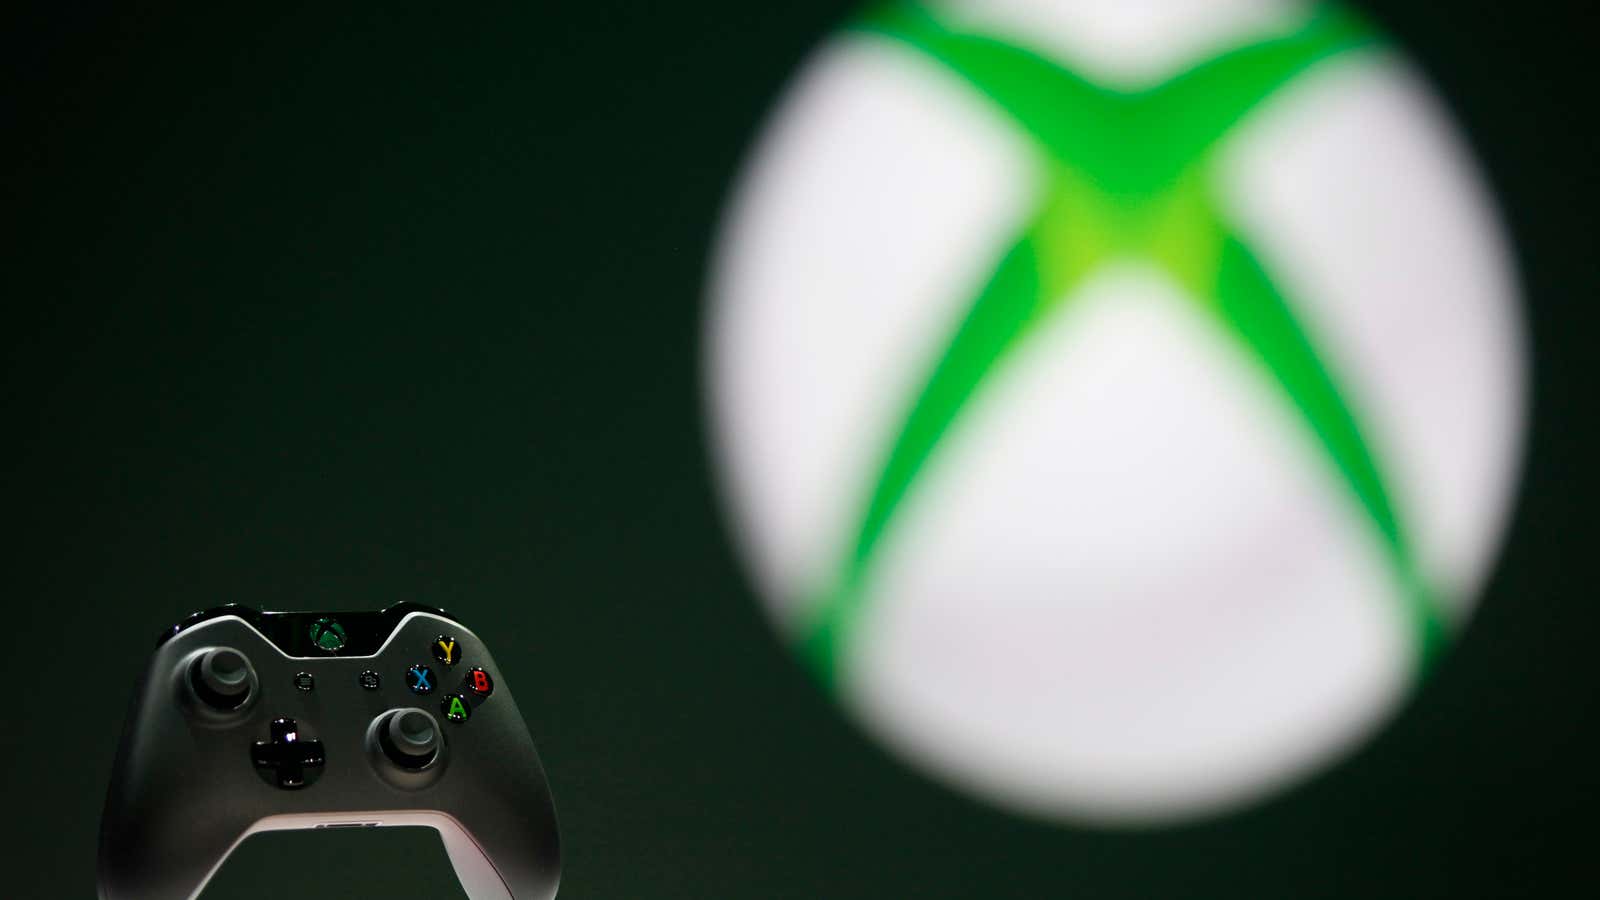 Microsoft signs licensing deal with cloud gaming provider Boosteroid, WTVB, 1590 AM · 95.5 FM